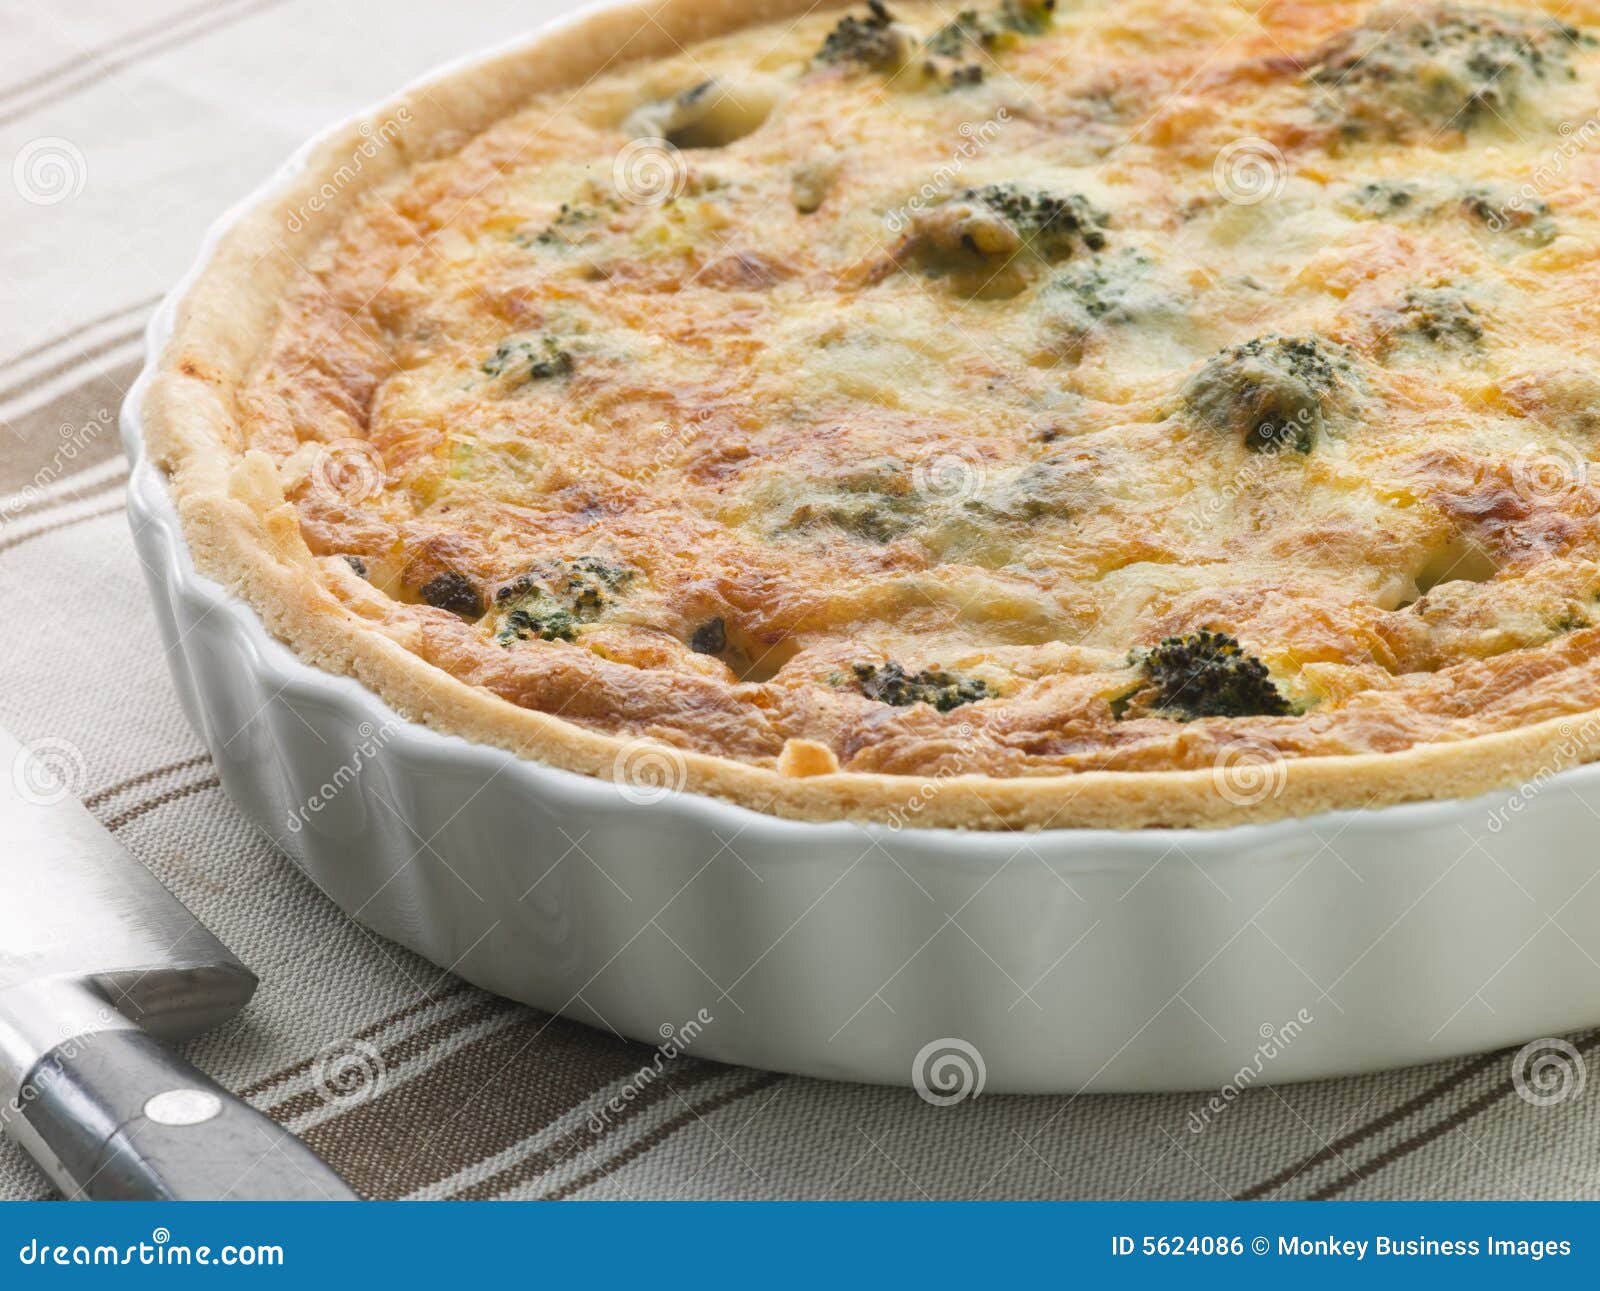 Broccoli and Roquefort Quiche in a Flan Dish Stock Photo - Image of ...